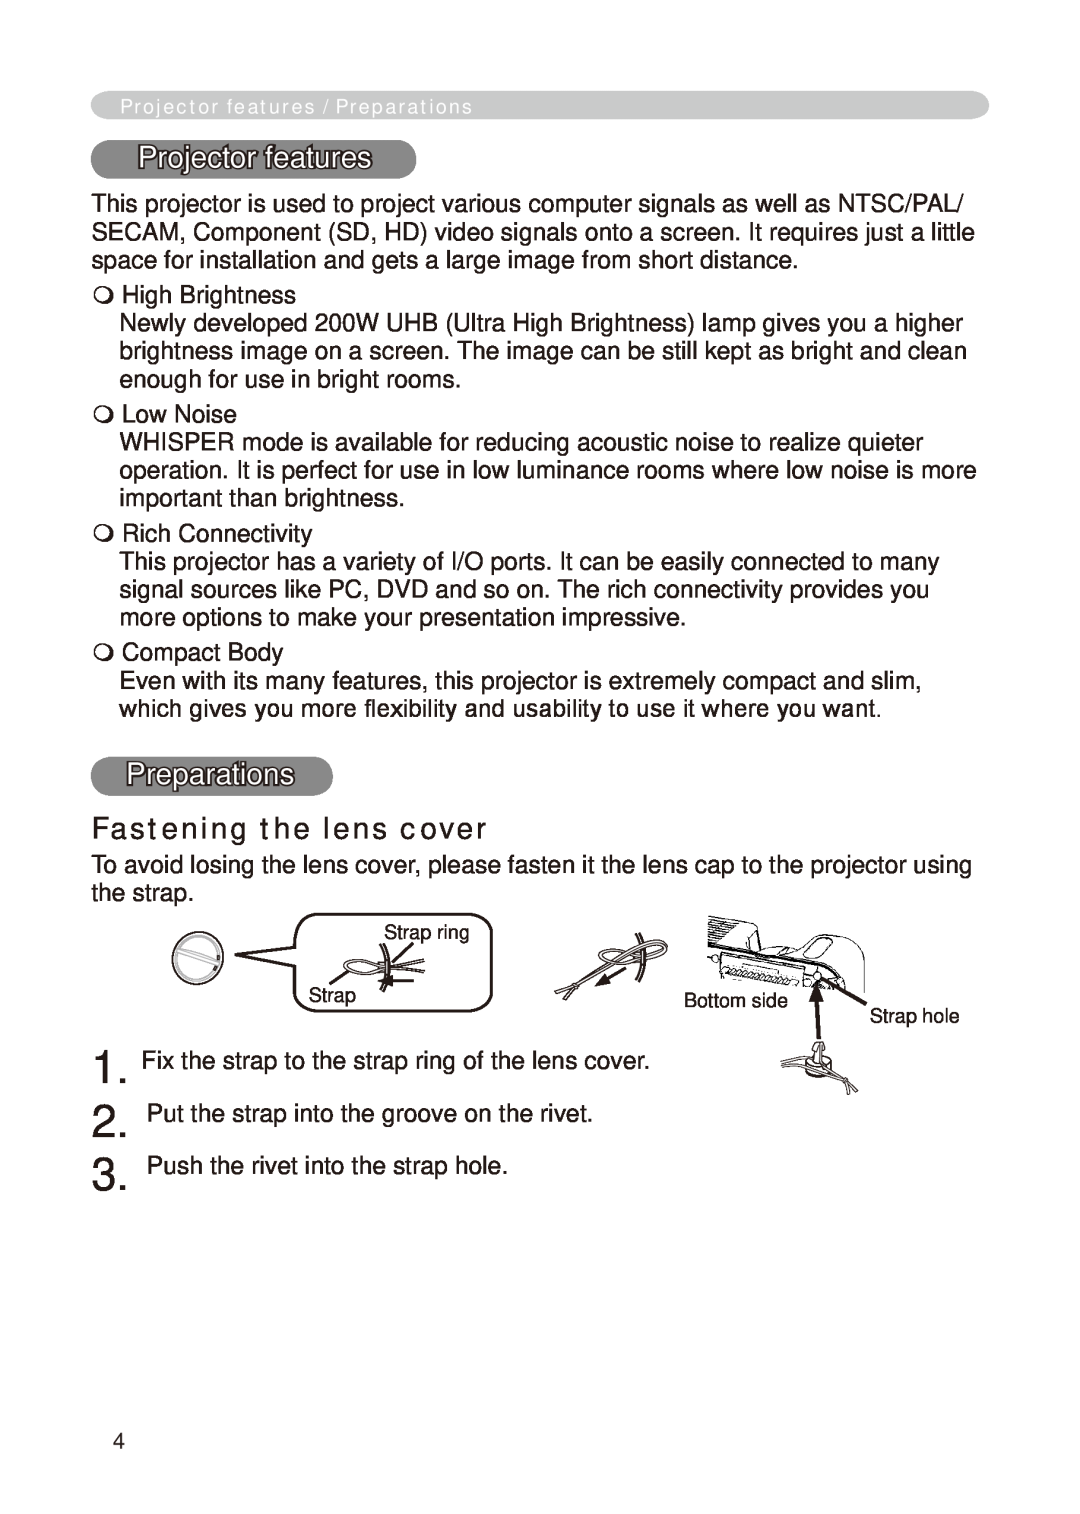 Hitachi CP-X268A user manual Projector features, Preparations, Fastening the lens cover 